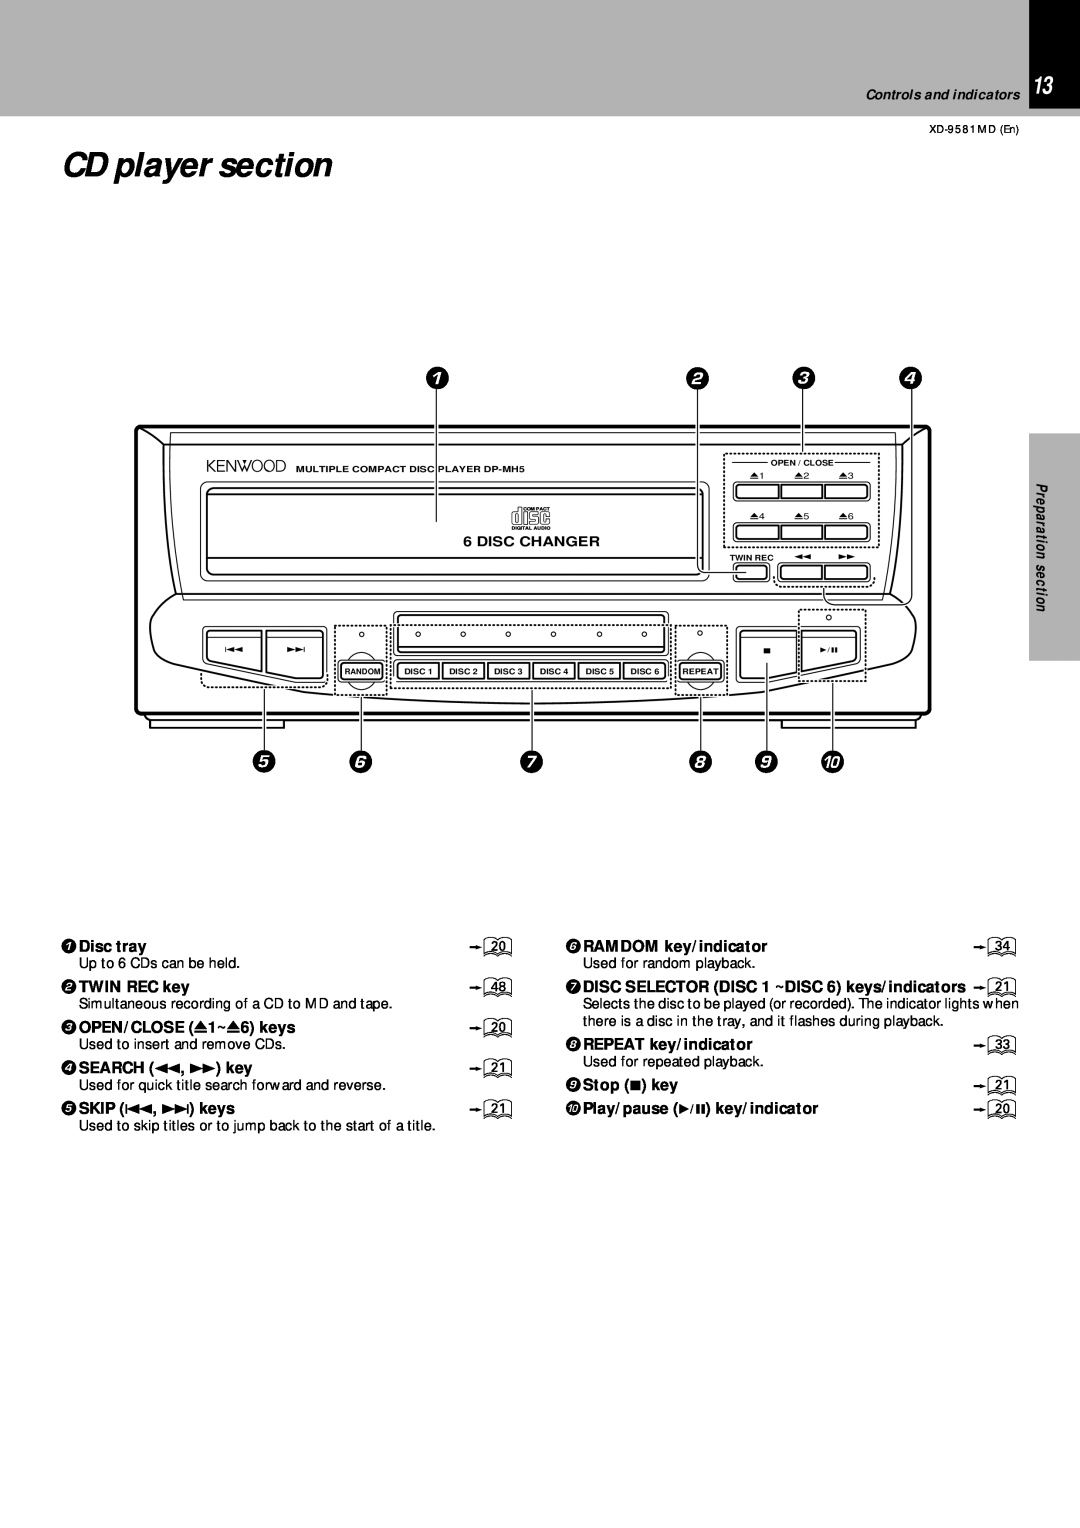 Kenwood XD-9581MD instruction manual CD player section 